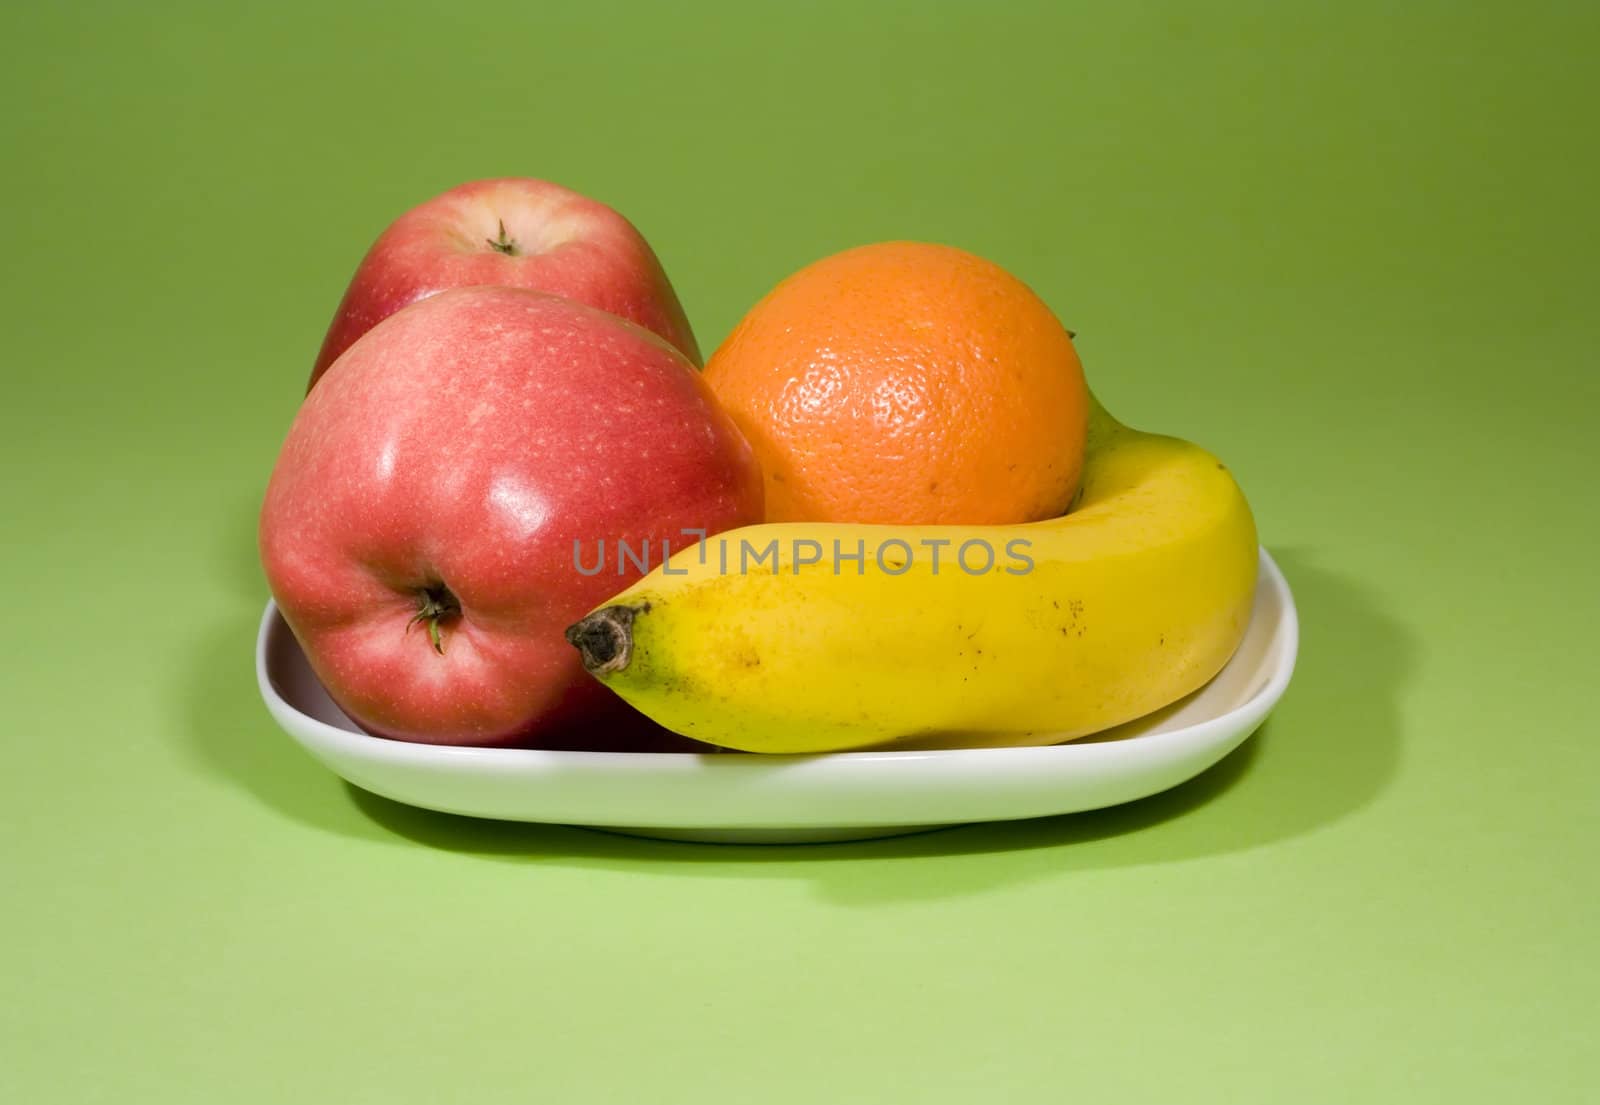 Juicy fruits on fresh green background